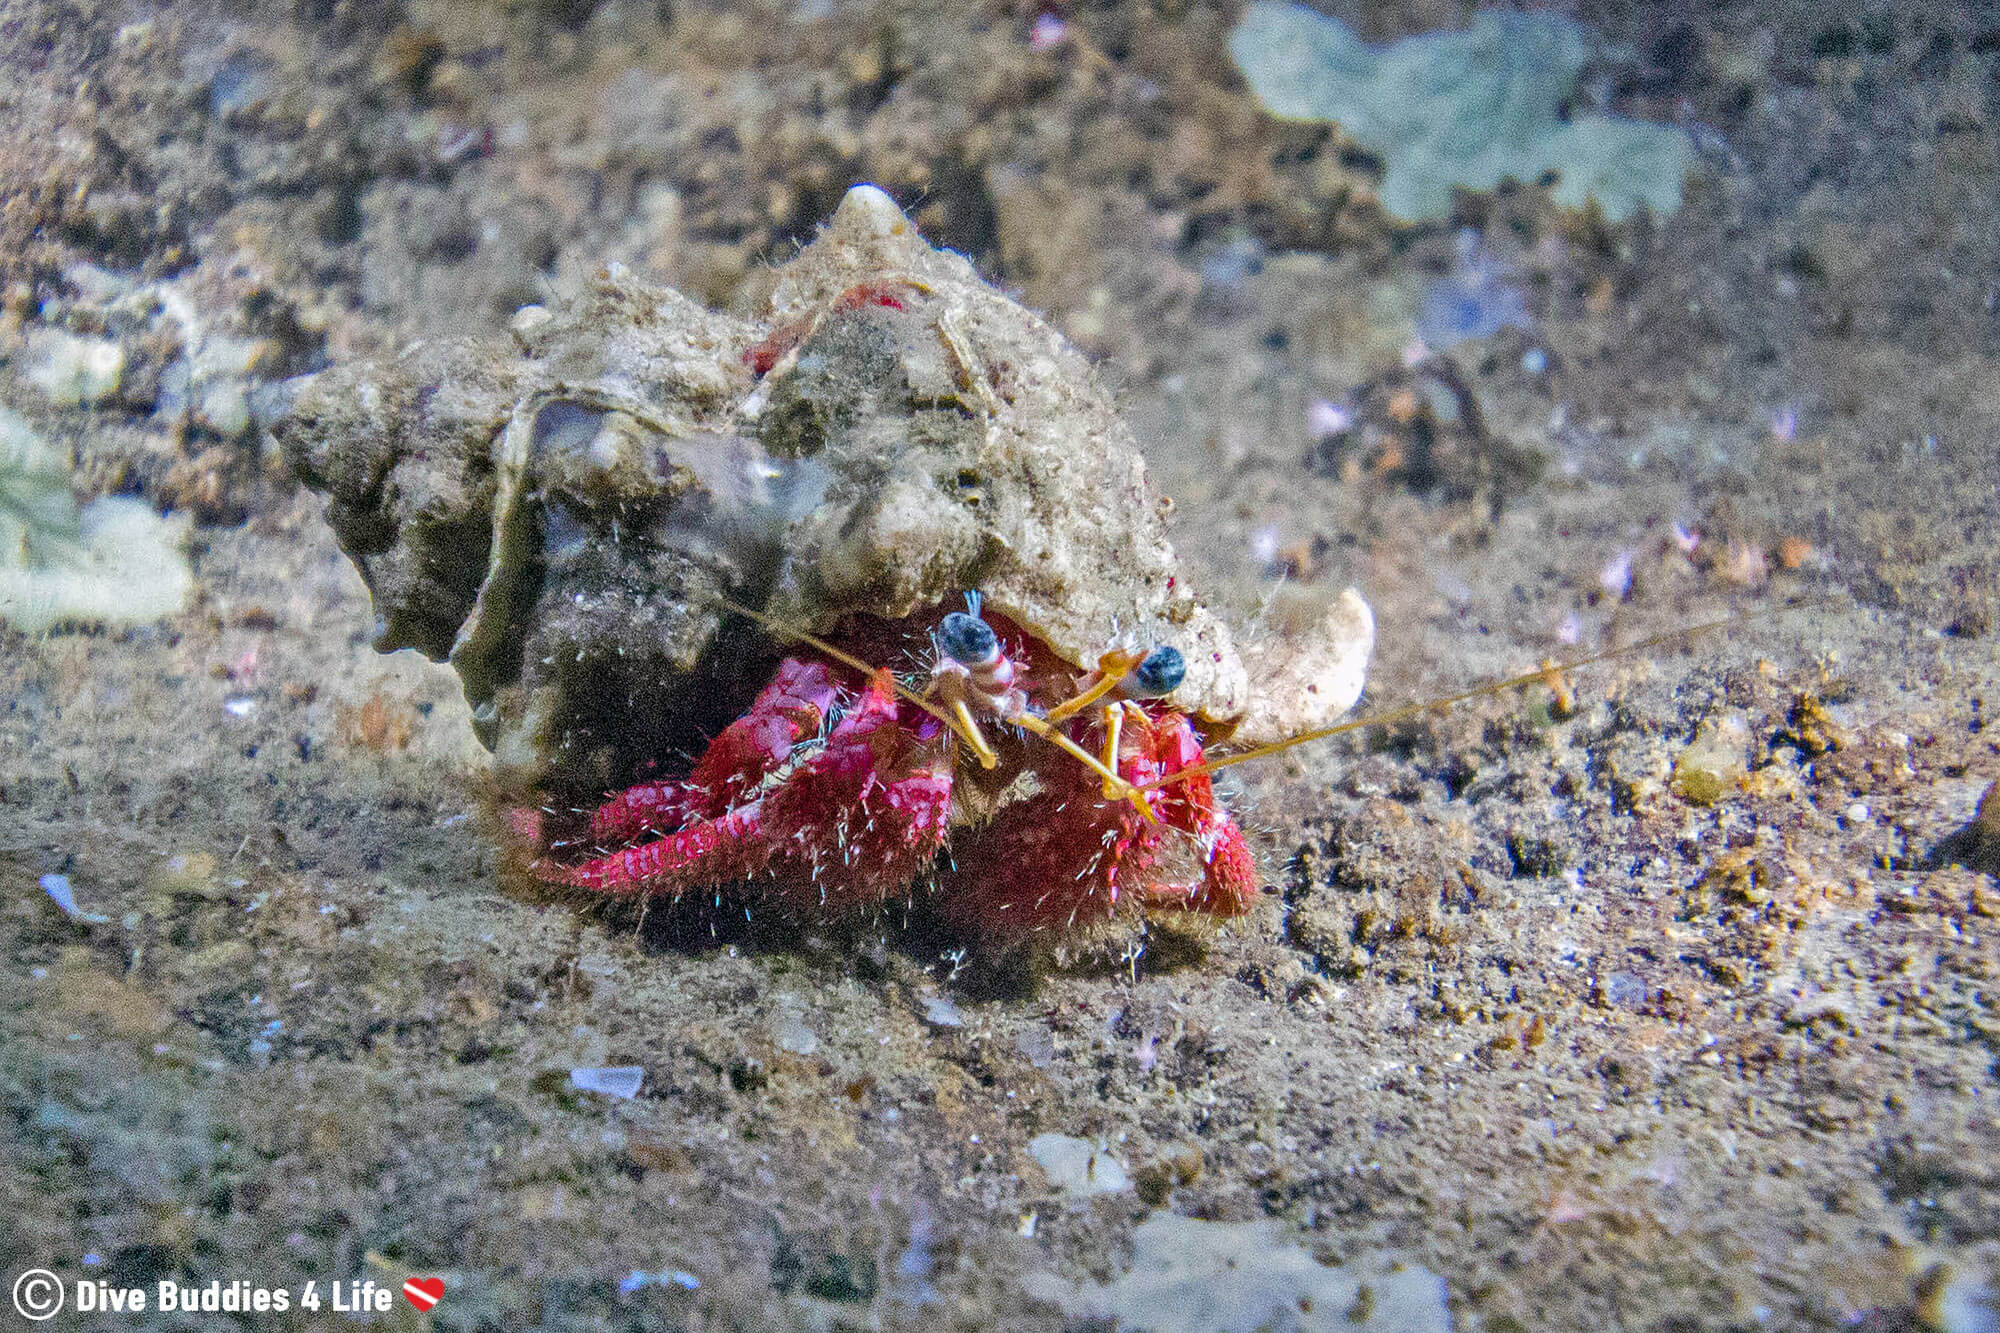 A Red Hermit Crab On The Bottom Of The Grotta Dell’Isca Mediterranean Sea Scuba Diving The Amalfi Coast, Italy, Europe 